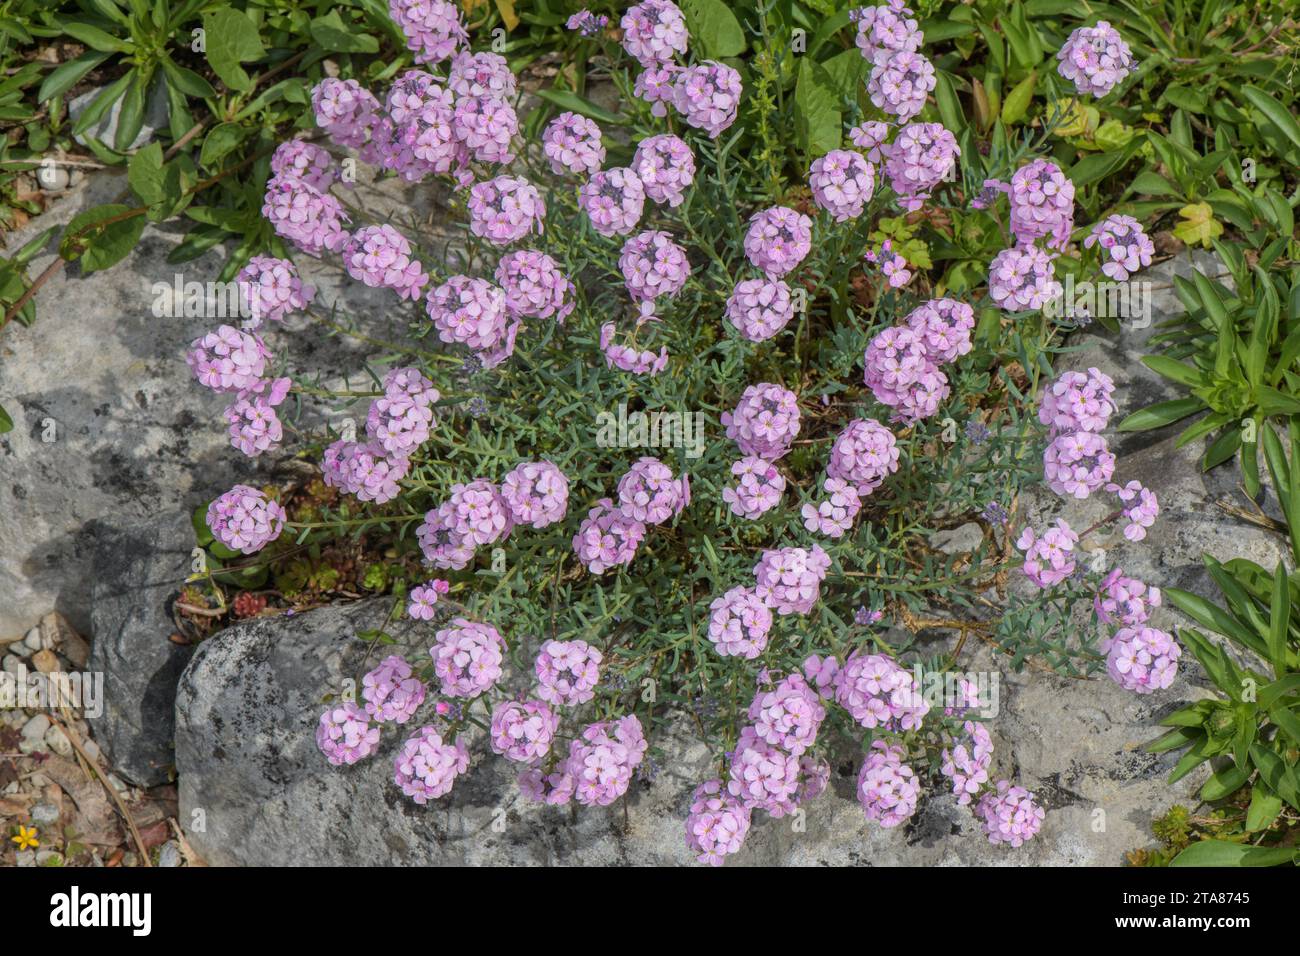 Fragrant Persian Stonecress, Aethionema schistosum, in cultivation; from Iran and Turkey. Stock Photo